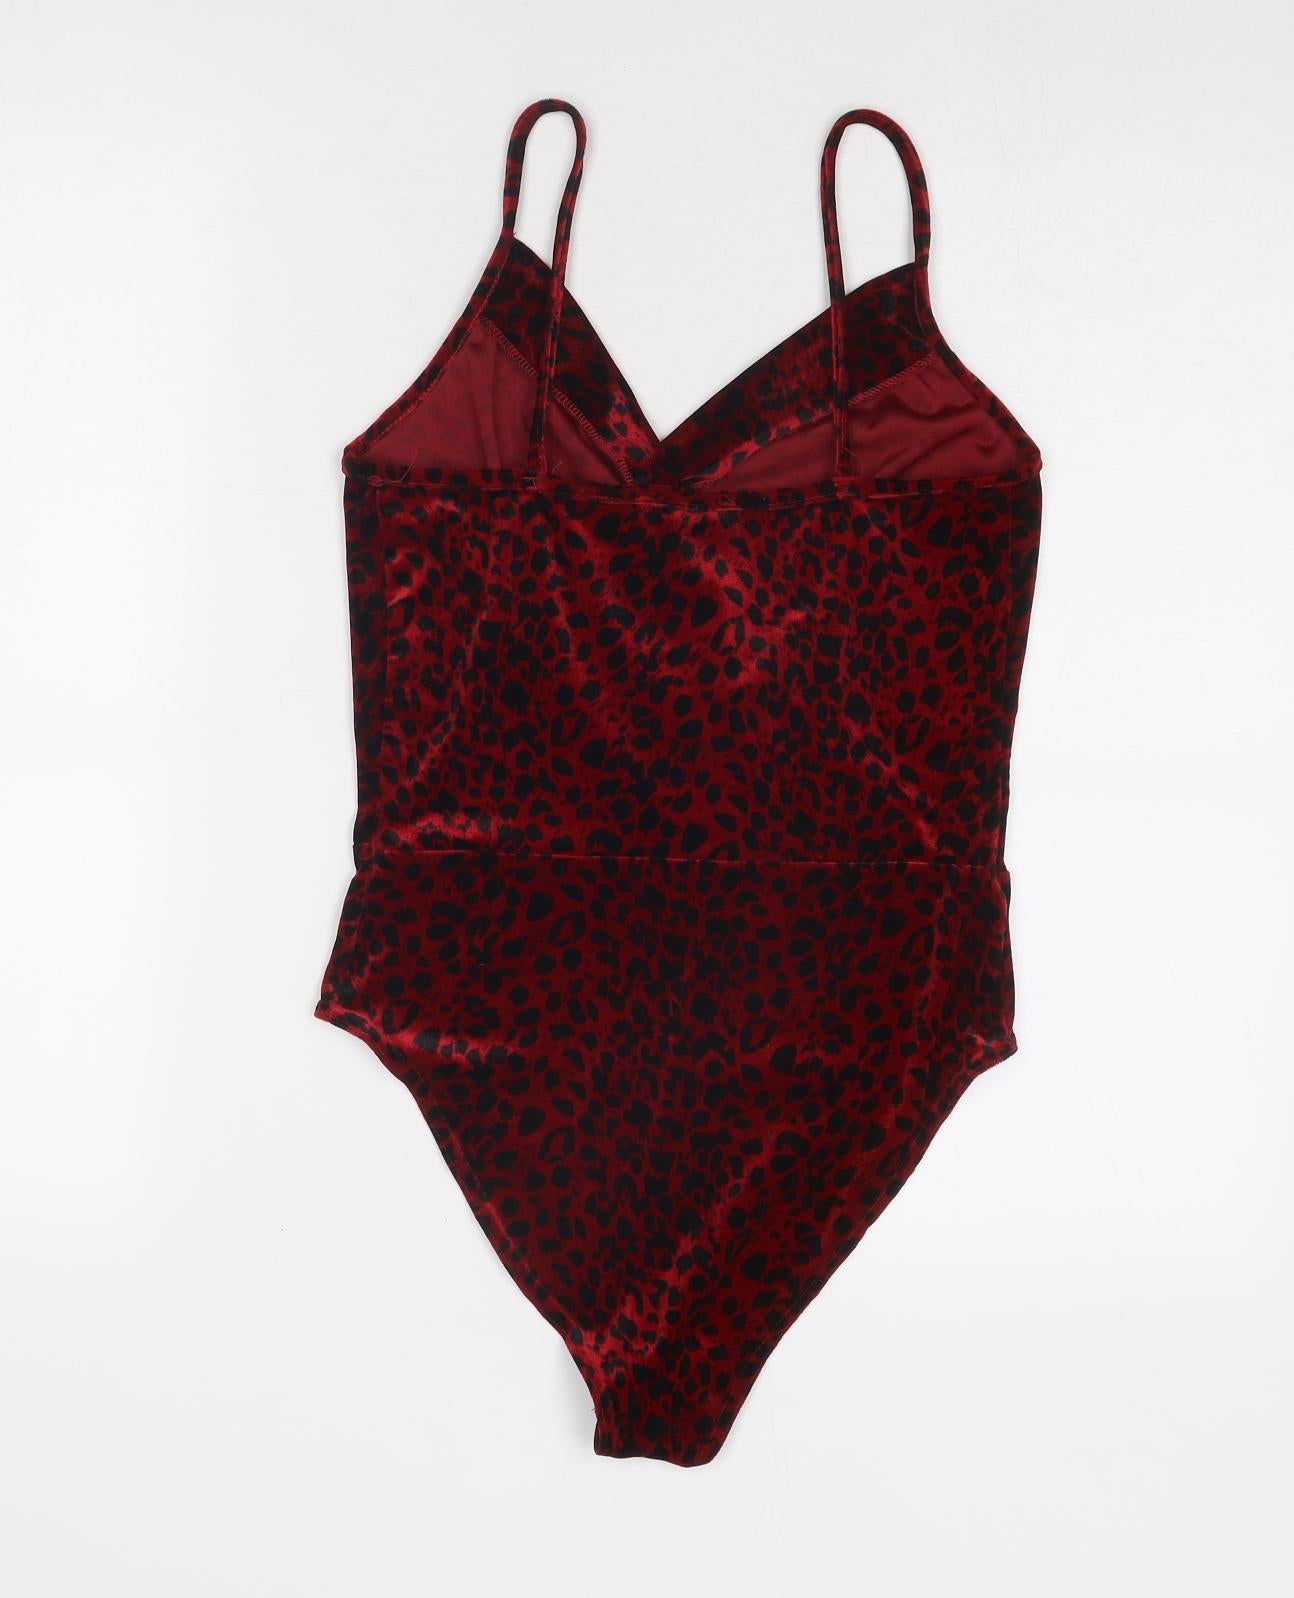 New Look Womens Red Animal Print Polyester Bodysuit One-Piece Size 12 Snap - Leopard Print